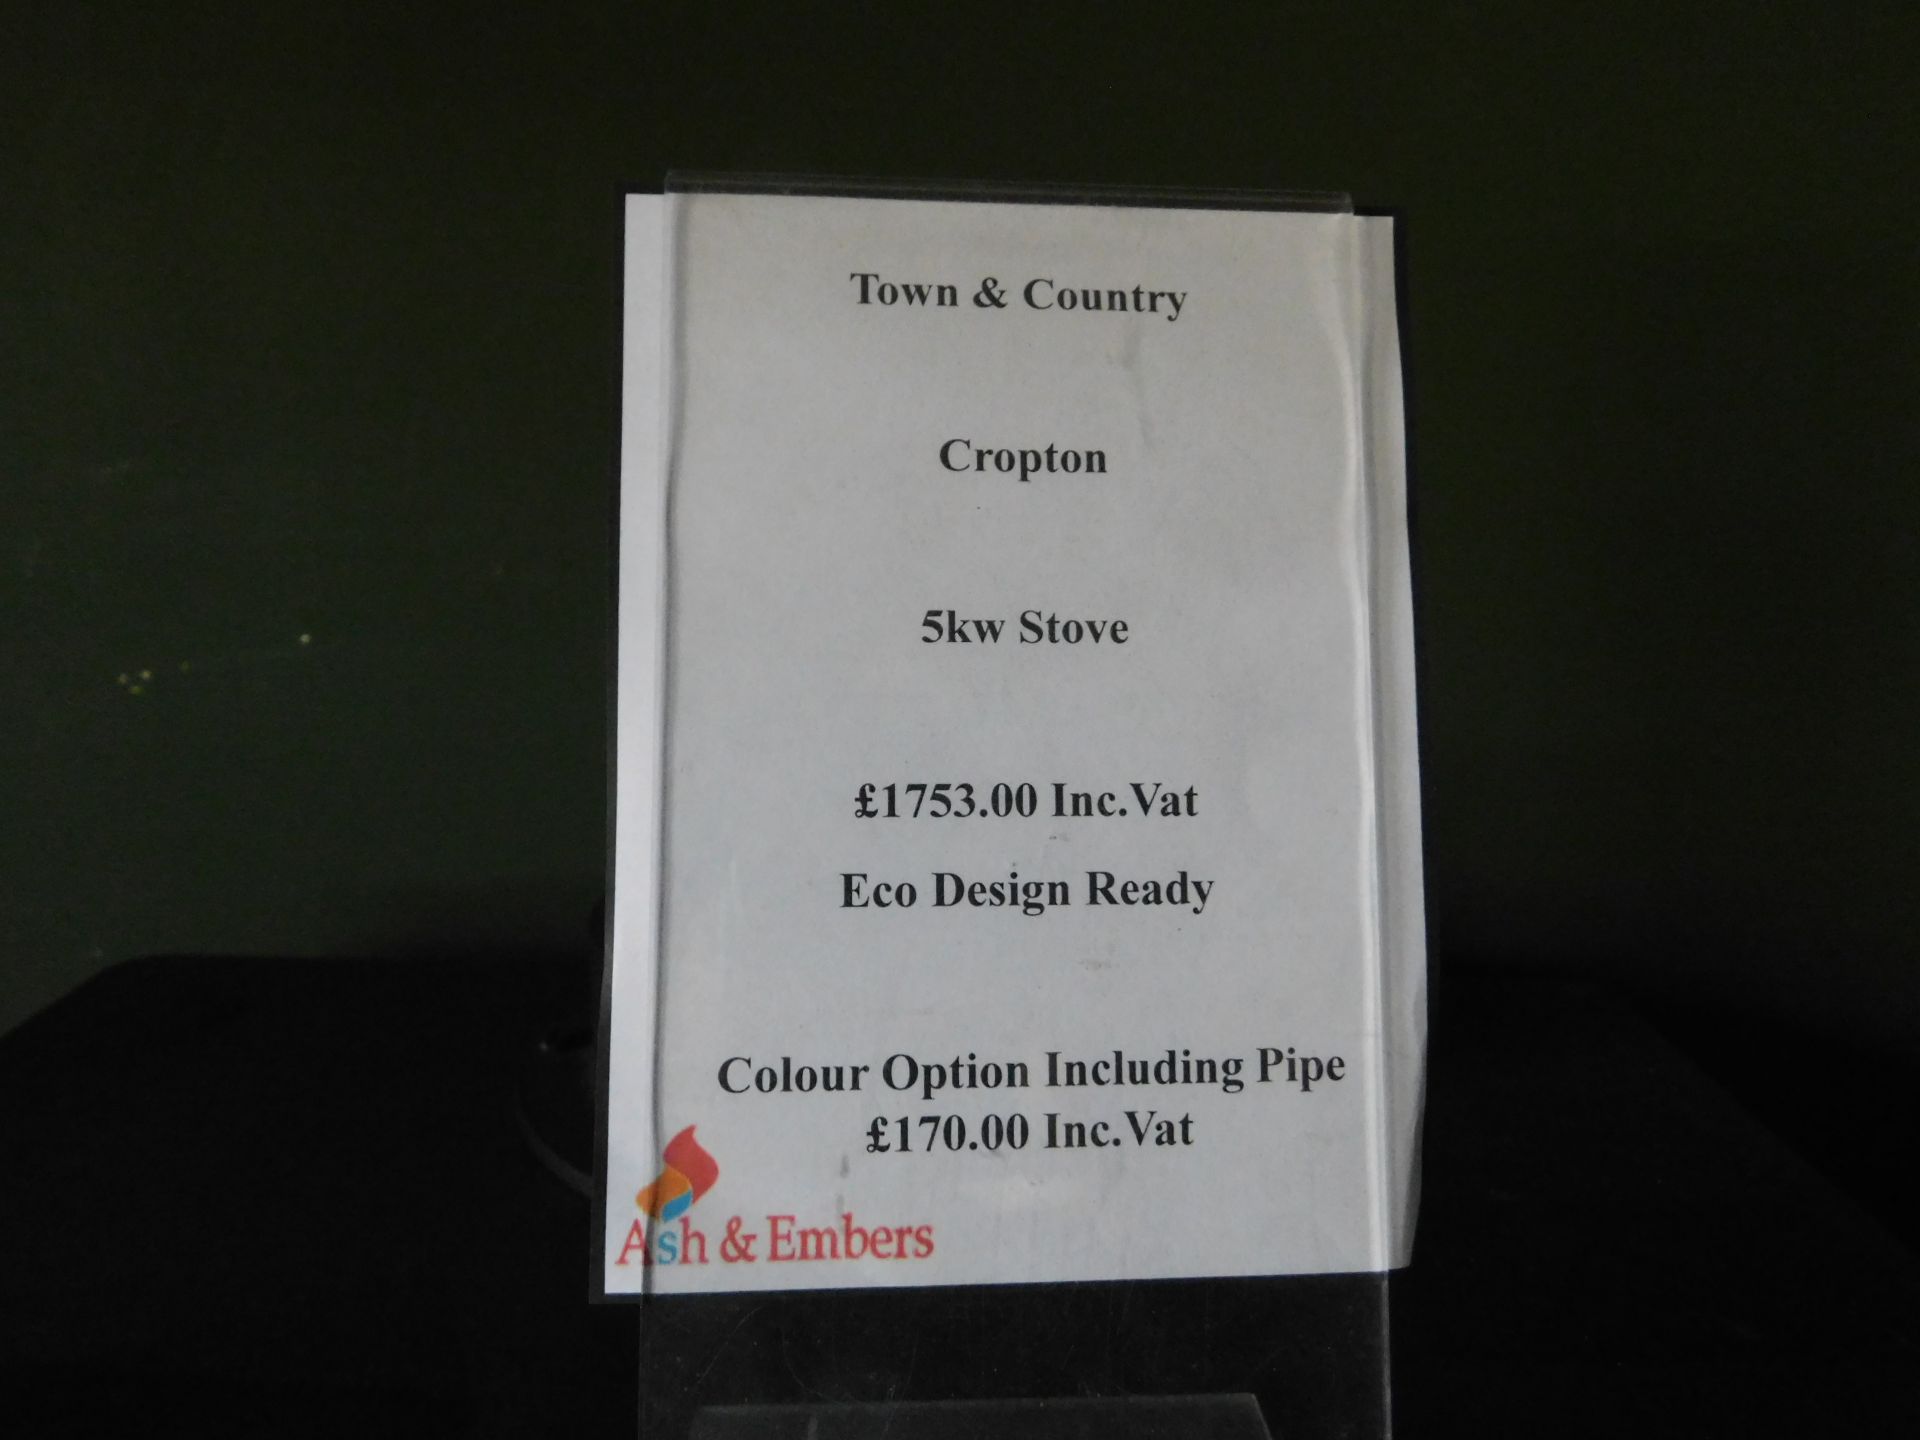 Ex-Display Town & Country “Cropton” 5kw Stove (Where the company’s description/price information - Image 3 of 3